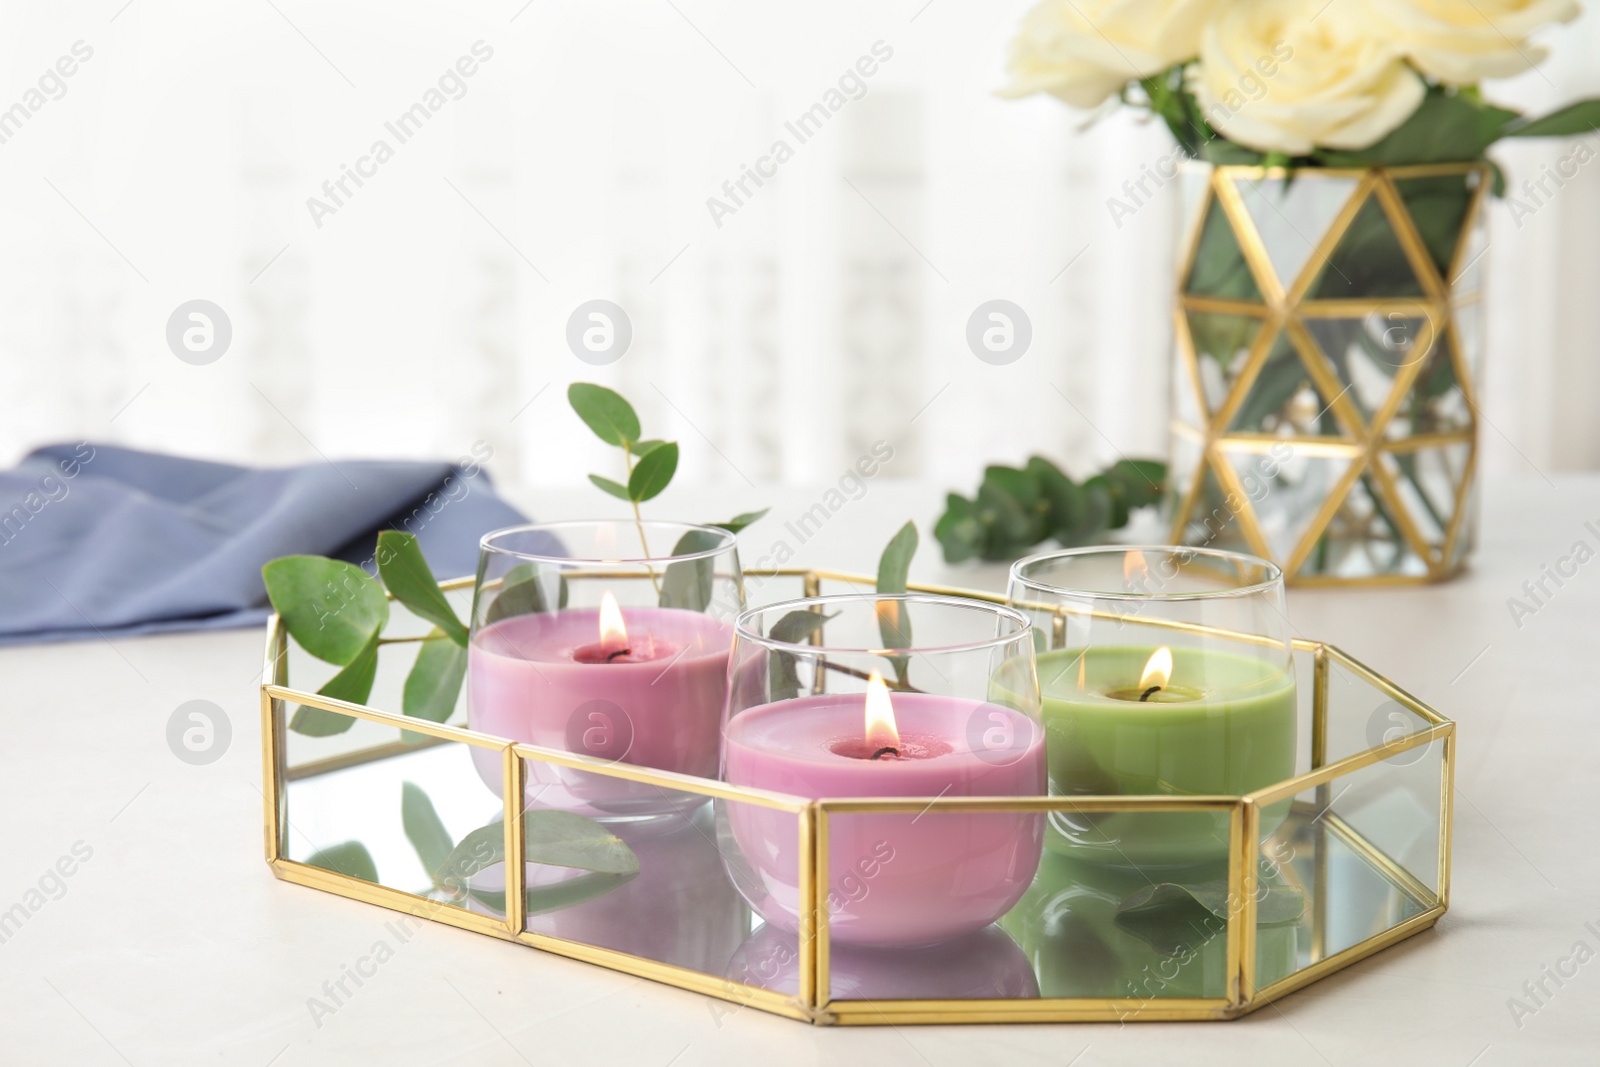 Photo of Tray with burning candles and eucalyptus on light table